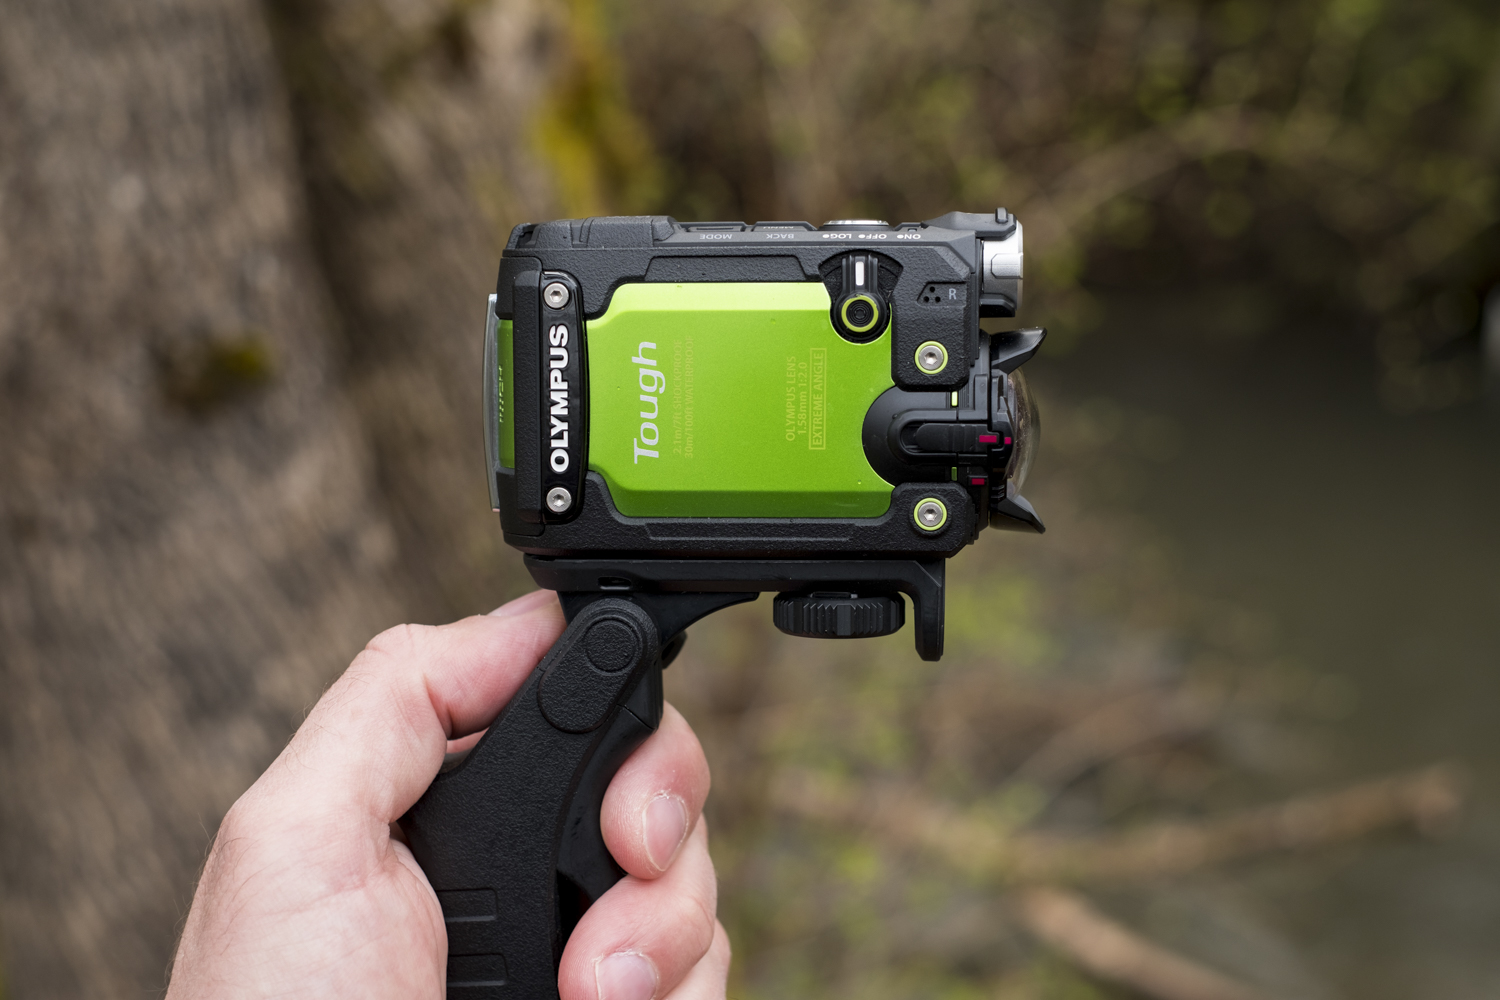 Bachelor opleiding Traditie moreel Olympus Tough TG-Tracker action camera review | Digital Trends